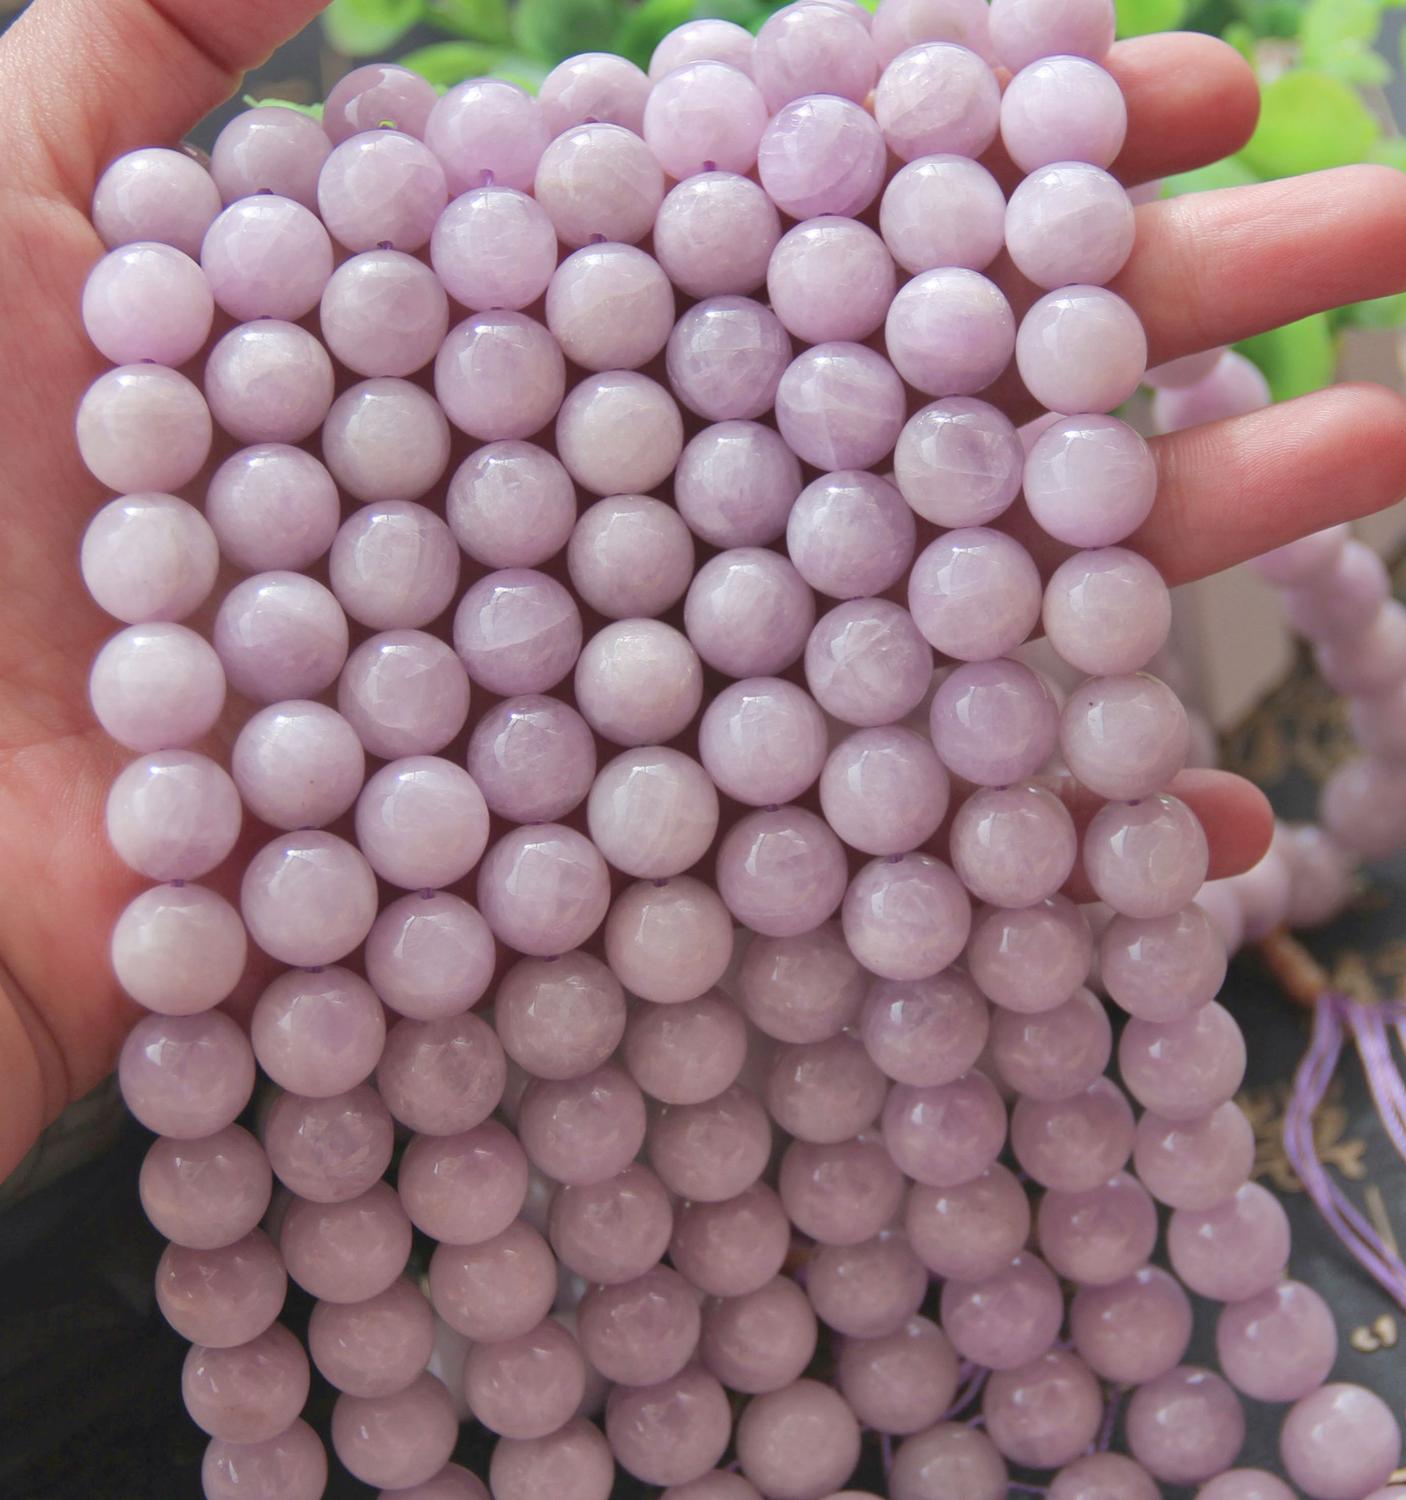 Fashion Top quality Natural Purple Kunzite Stone Beads Smooth Loose Round Noble Spodumene Beads 6/8/10mm For Making DIY Jewelry